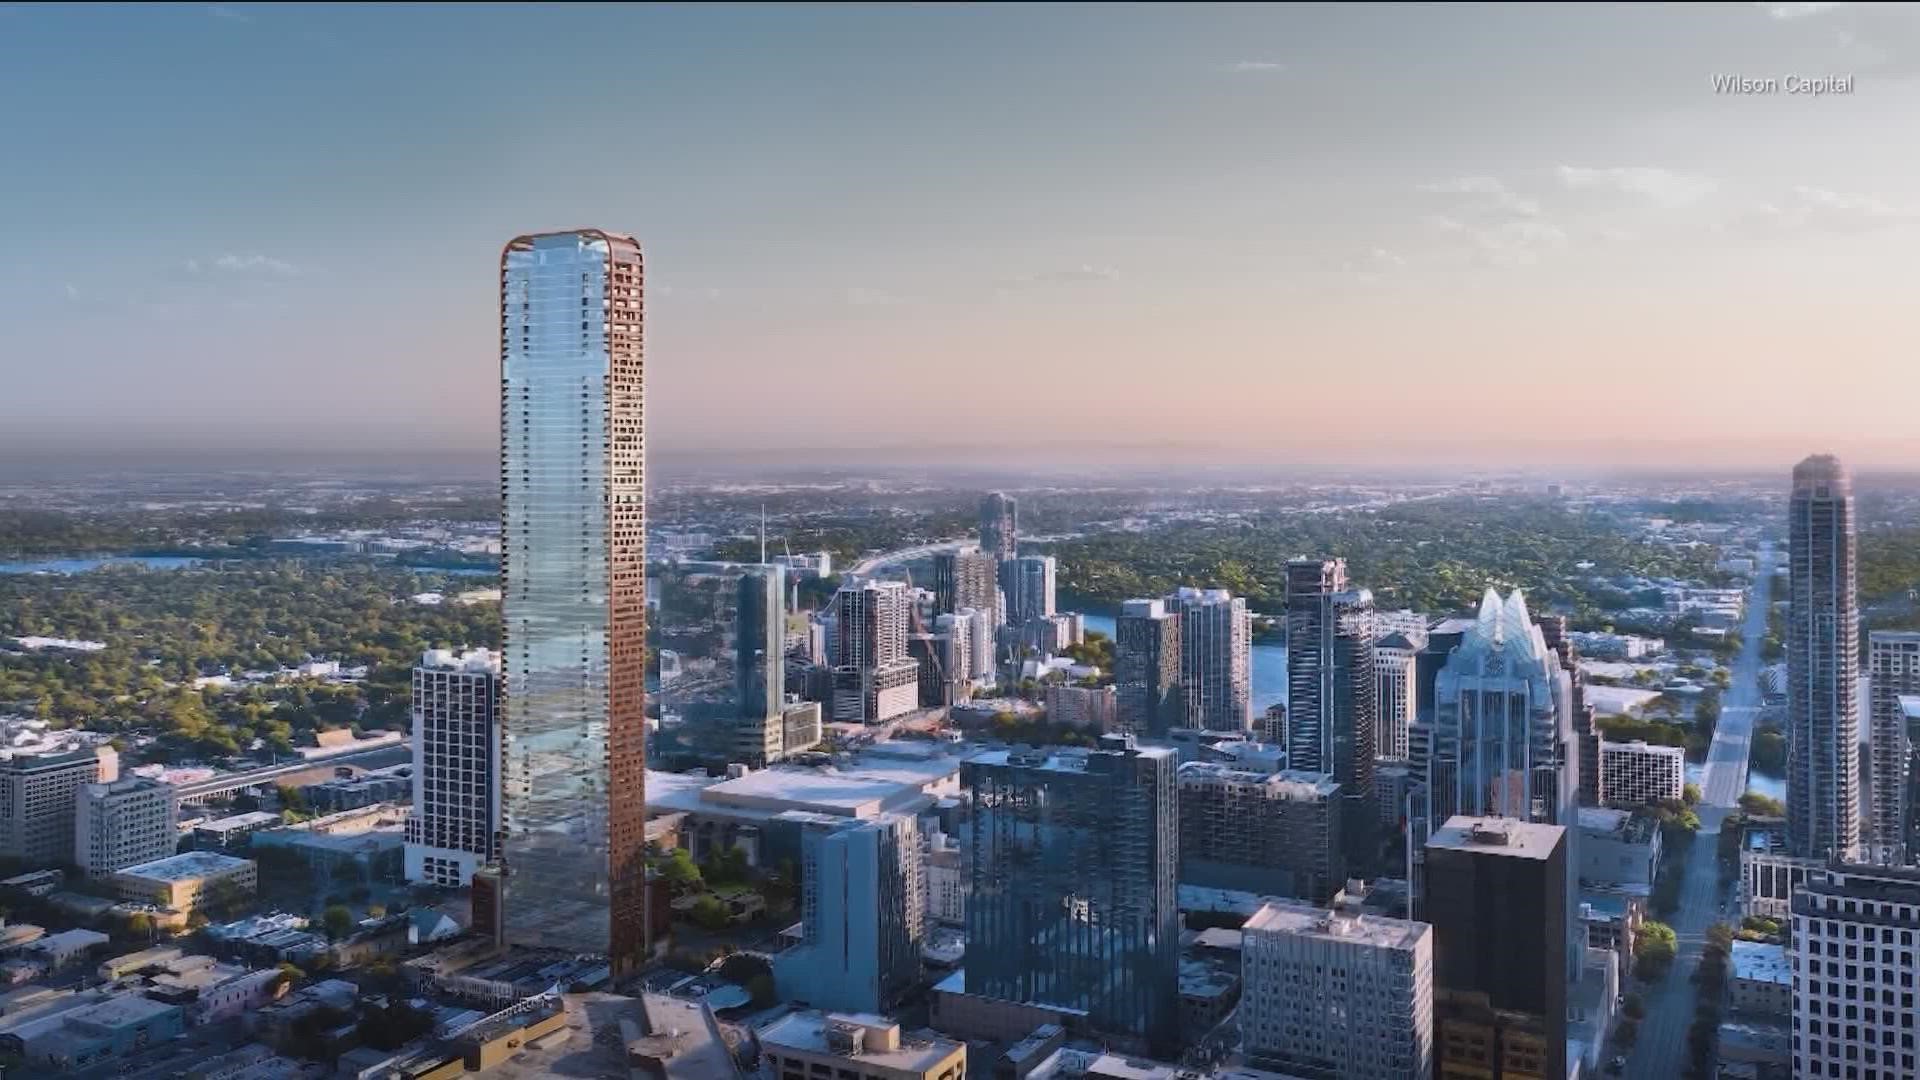 A skyscraper that would be the tallest tower in Texas has hit a construction roadblock.